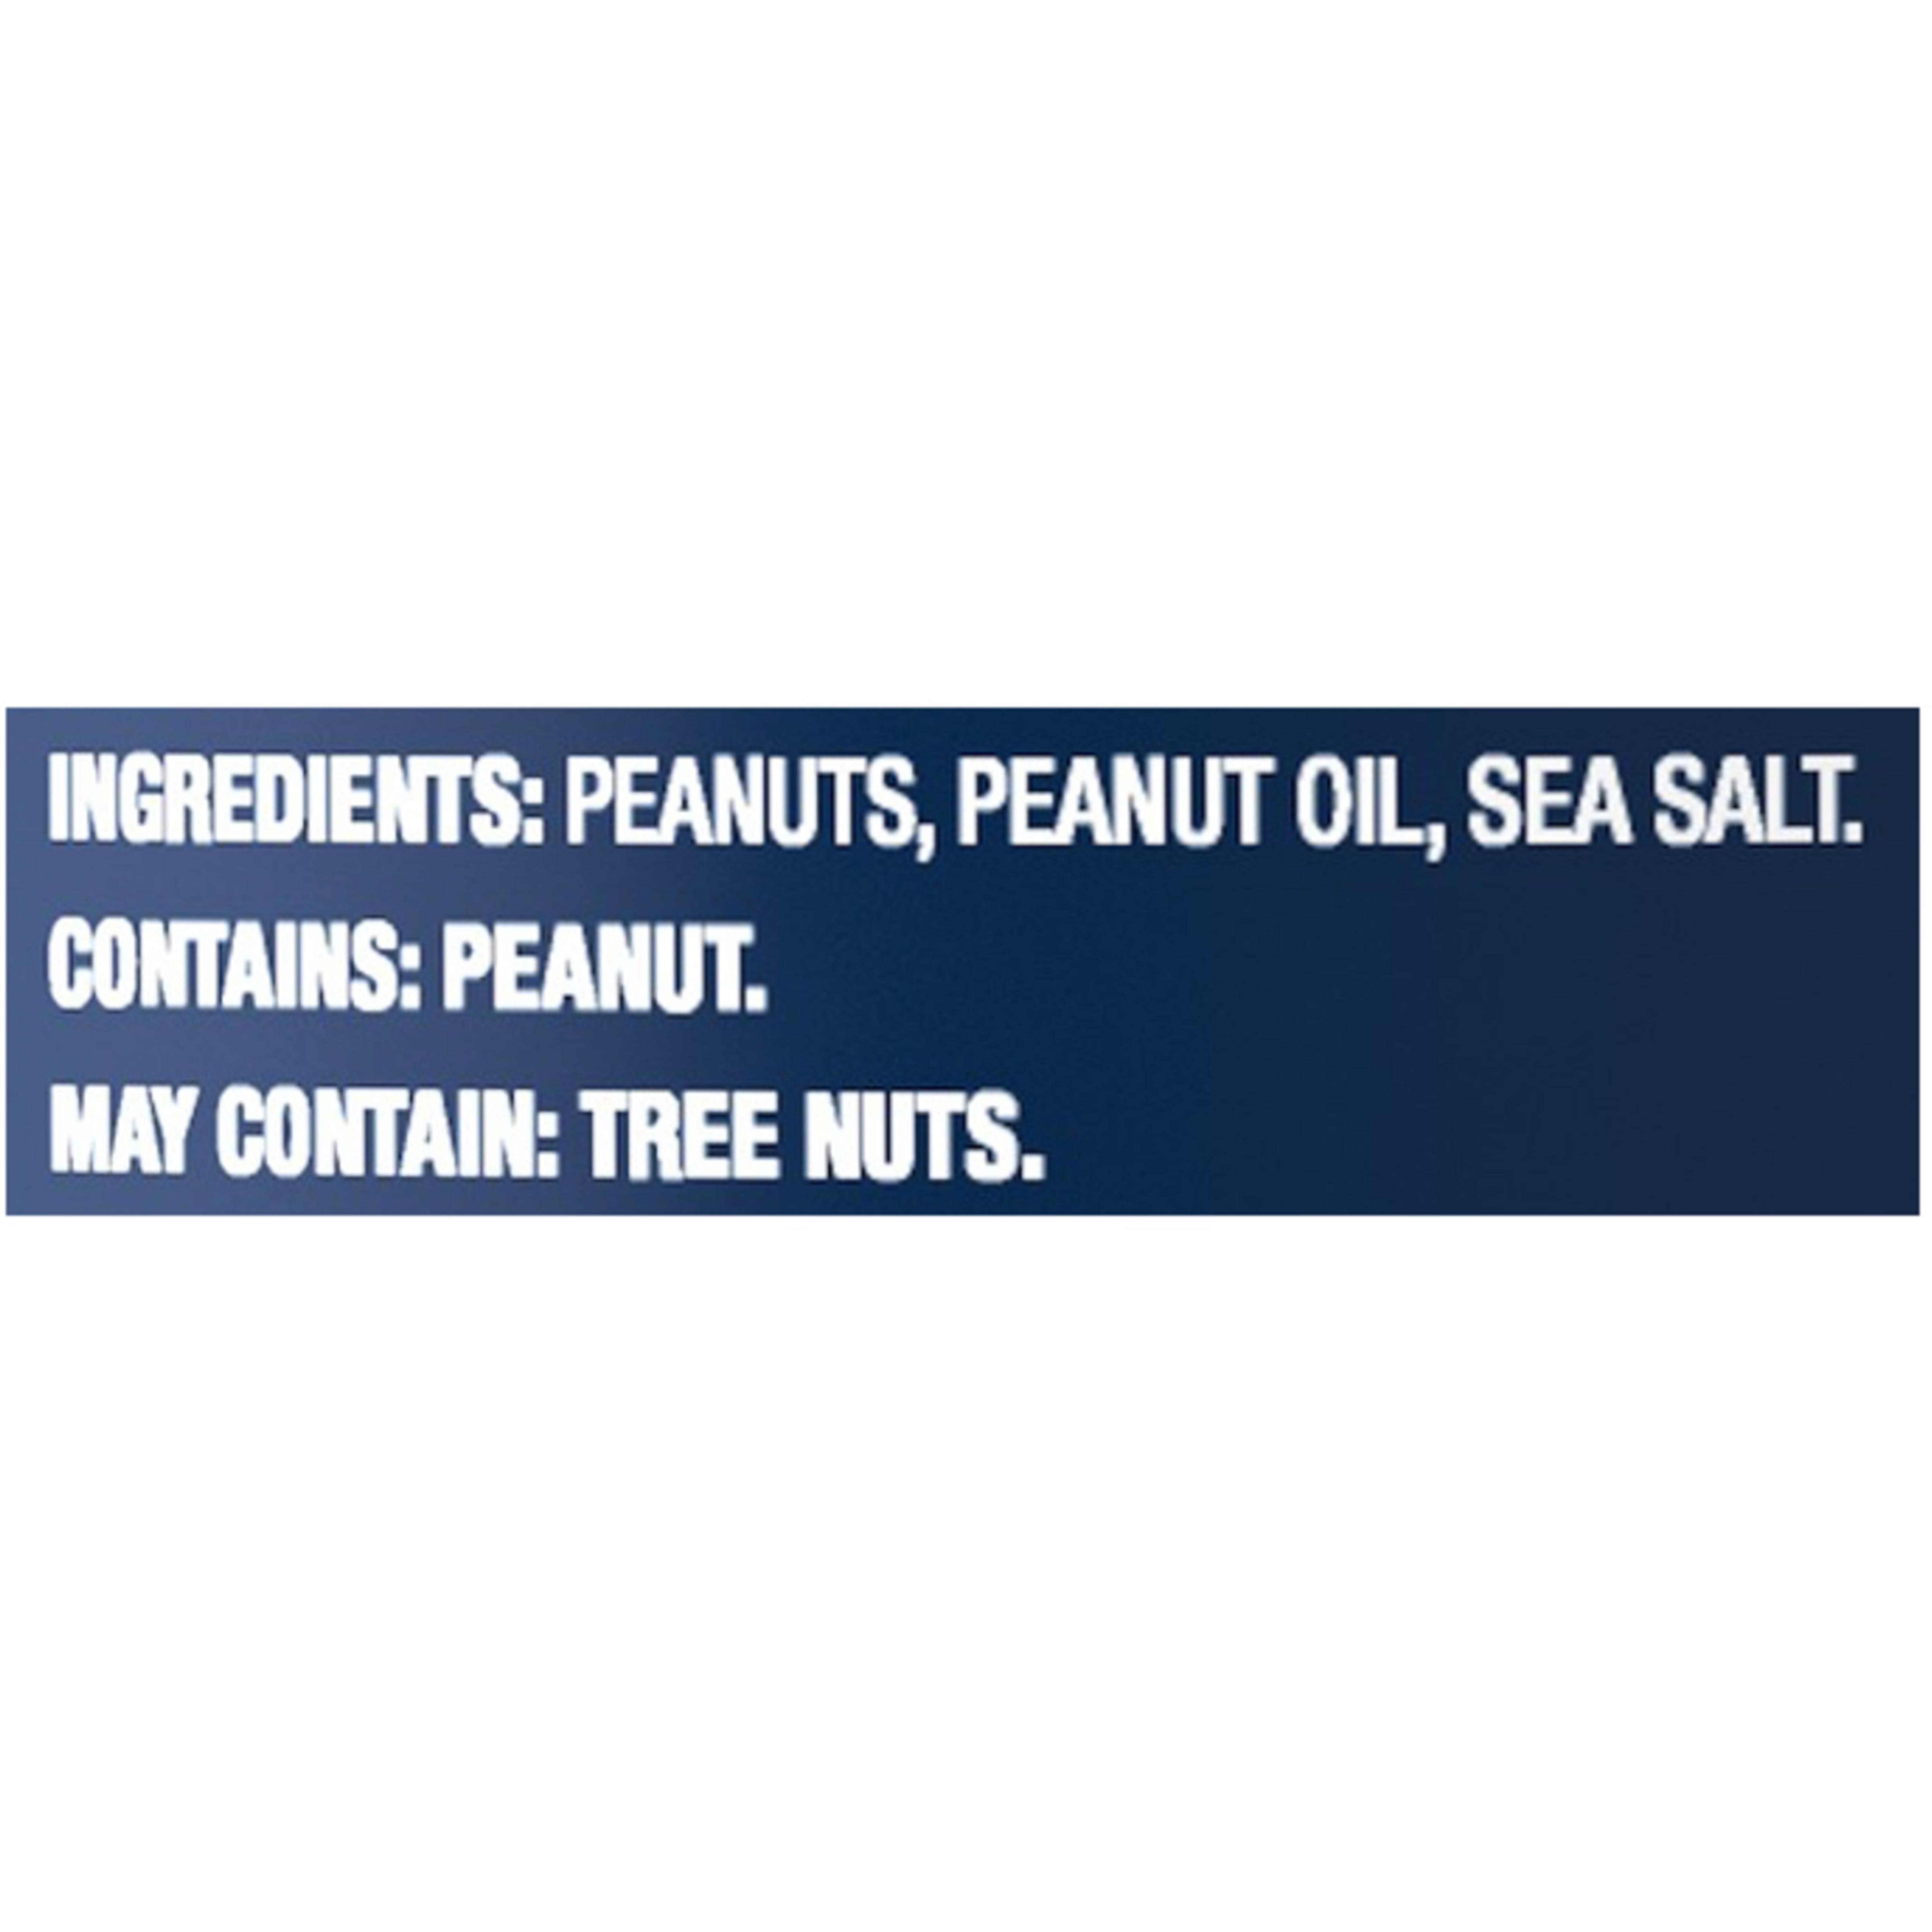 PLANTERS® Salted Peanuts, 56 Oz Can - PLANTERS® Brand